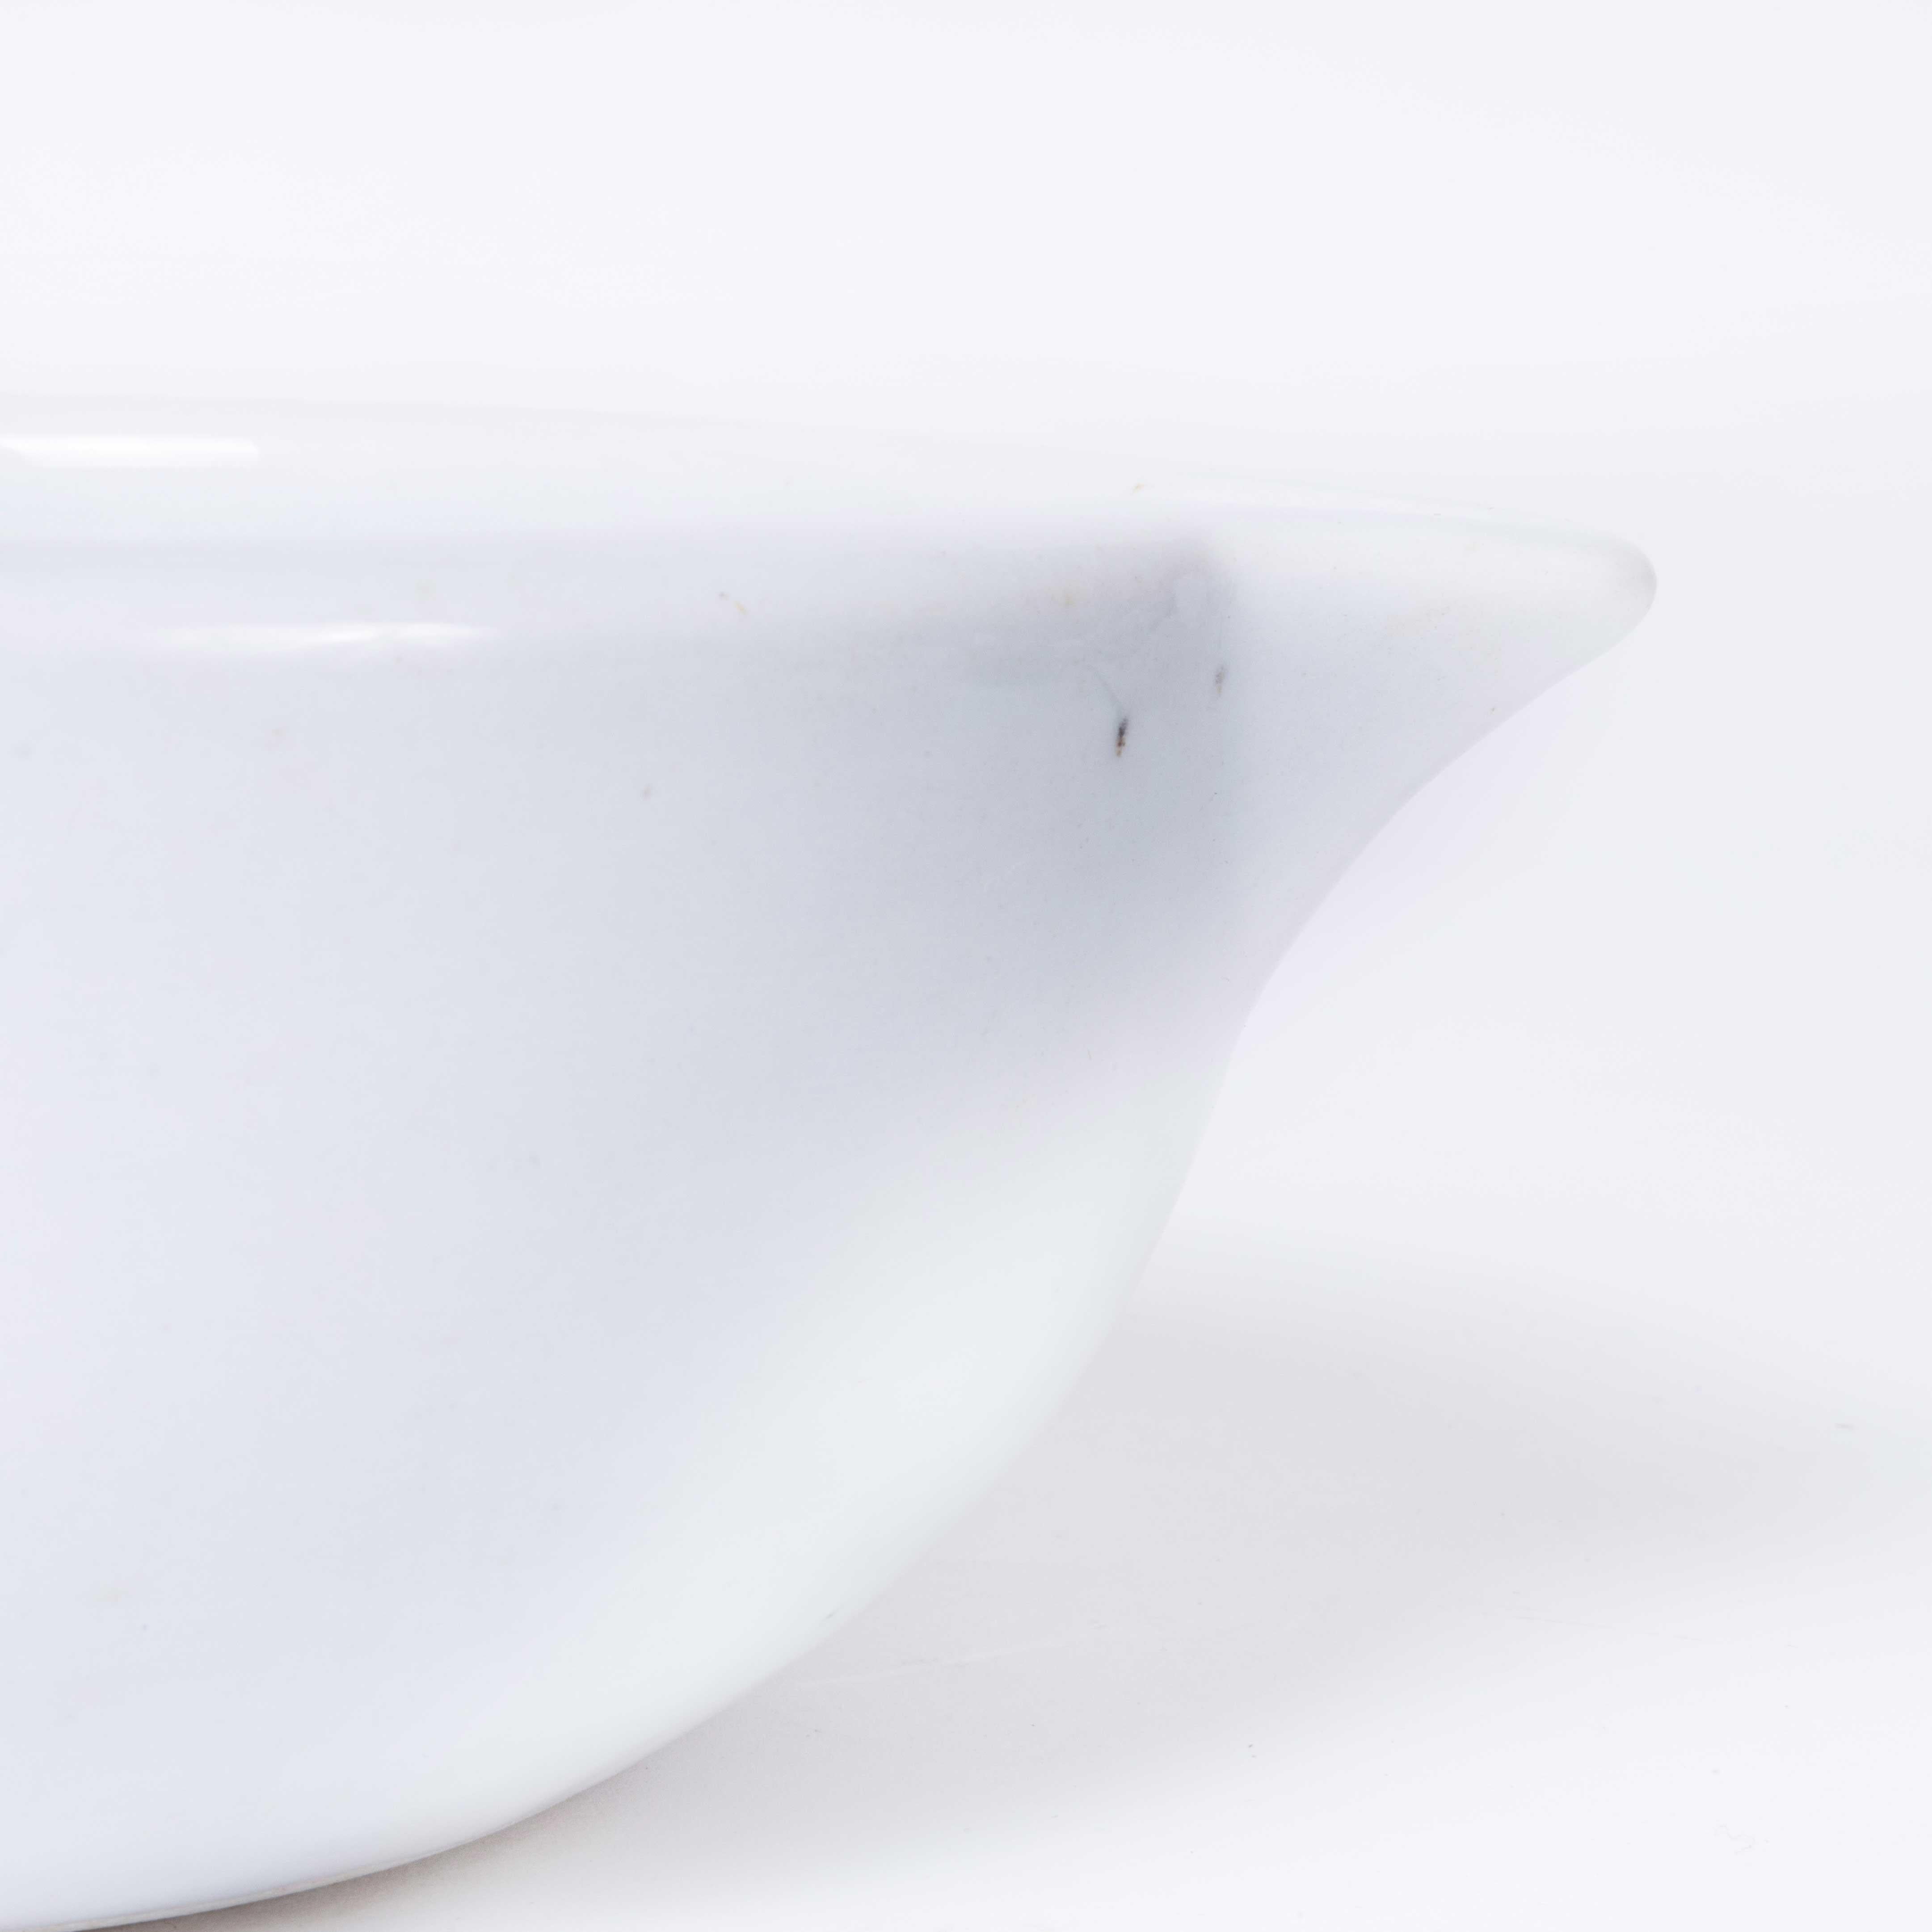 Mid-century heavy porcelain crucible laboratory bowl
Mid-century heavy porcelain crucible laboratory bowl. Made in Czech. A white porcelain bowl with a smooth finish and a spout for pouring. In excellent vintage condition.

WORKSHOP REPORT
Our